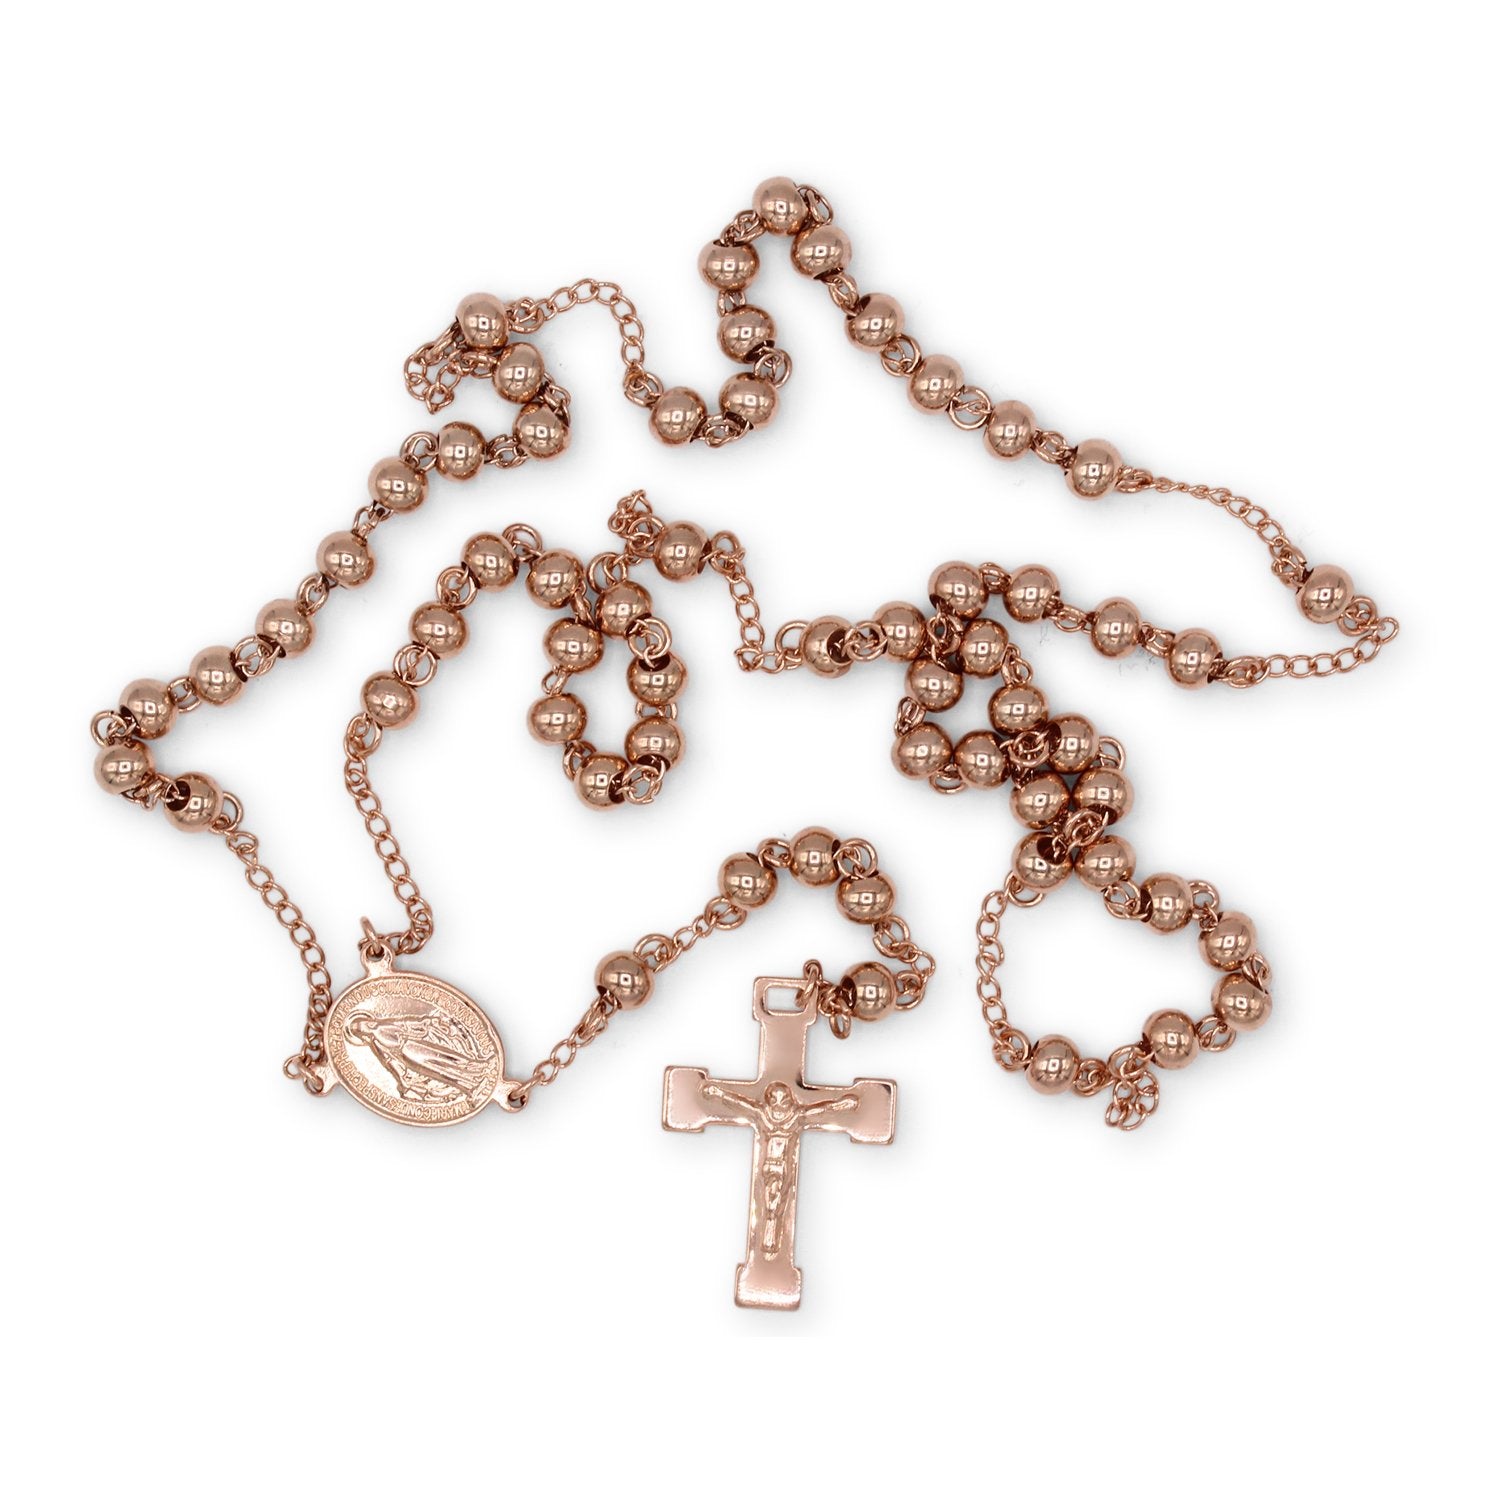 Cross Charm Rosary Necklace Set 